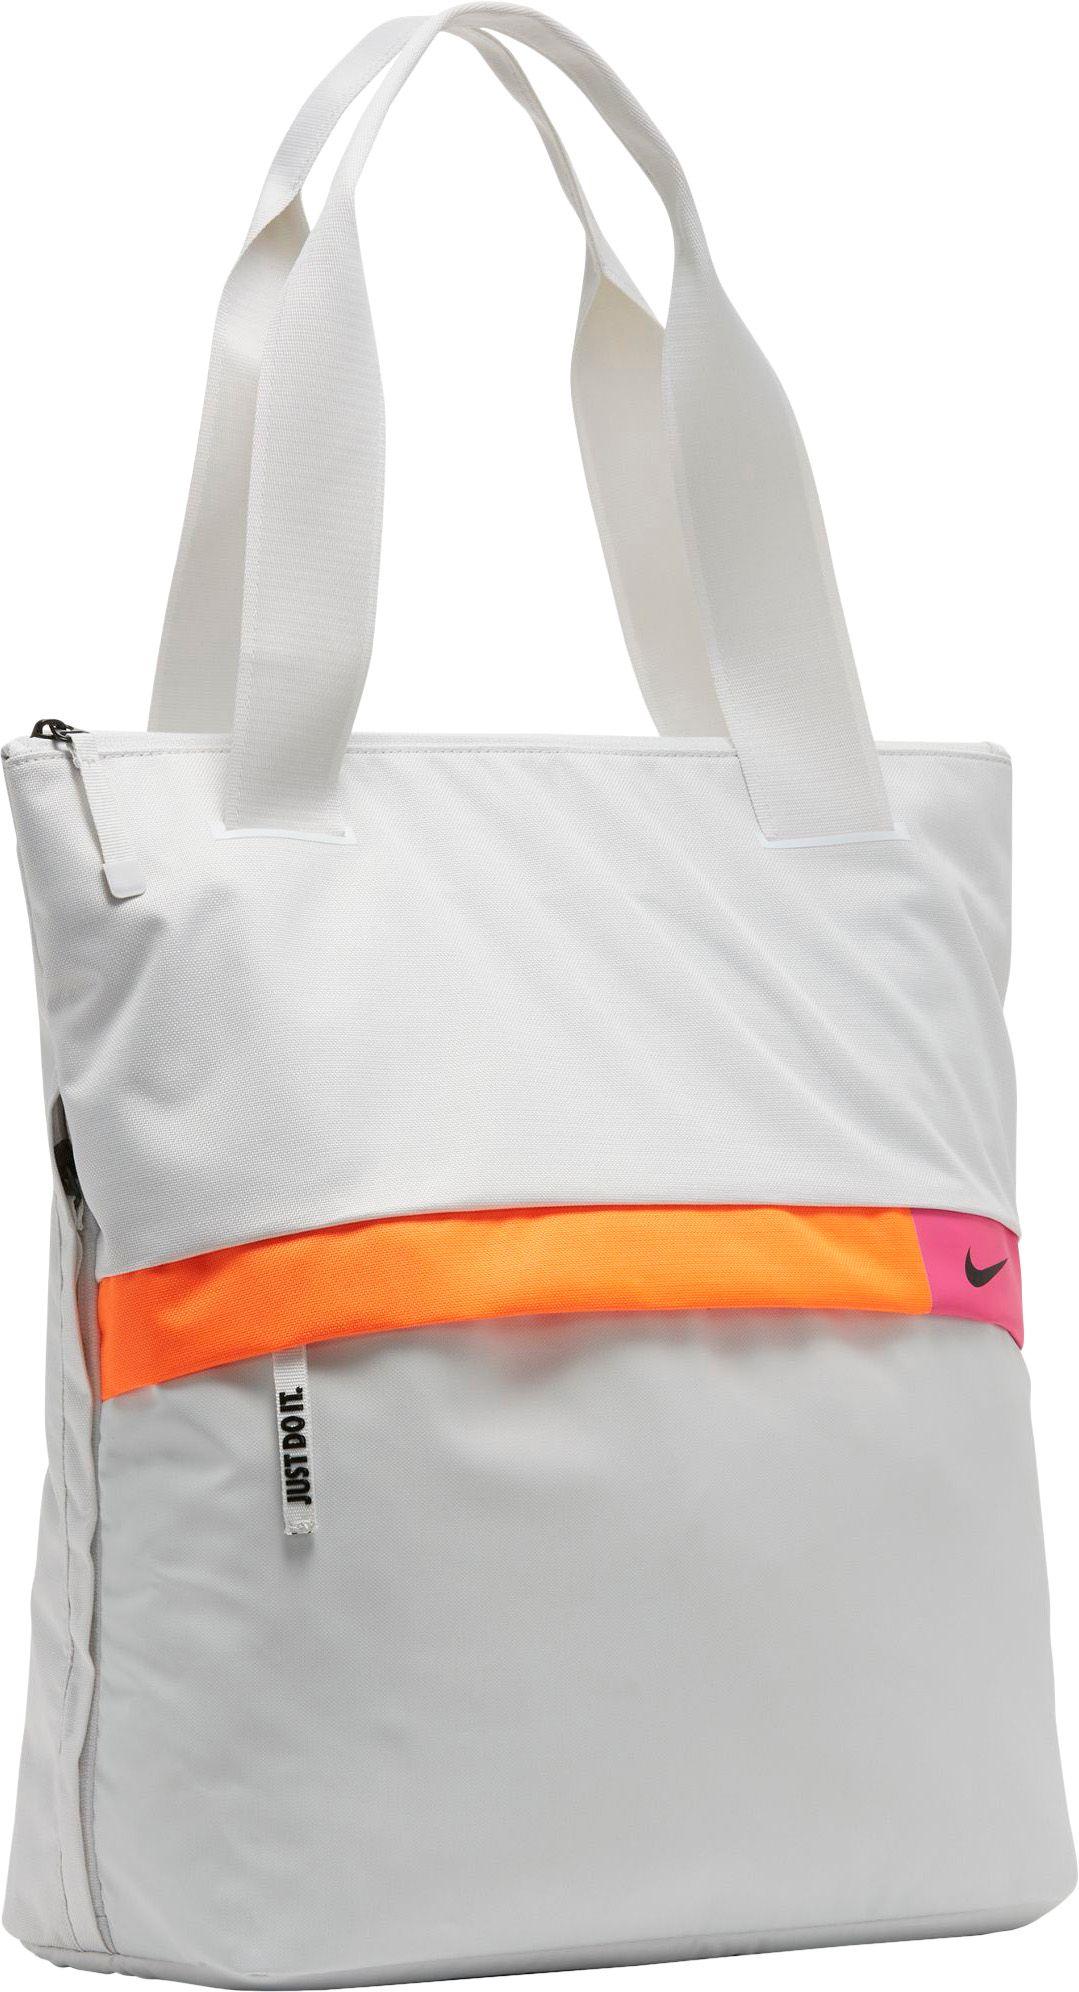 Nike Radiate Graphic Training Tote Bag in White - Lyst